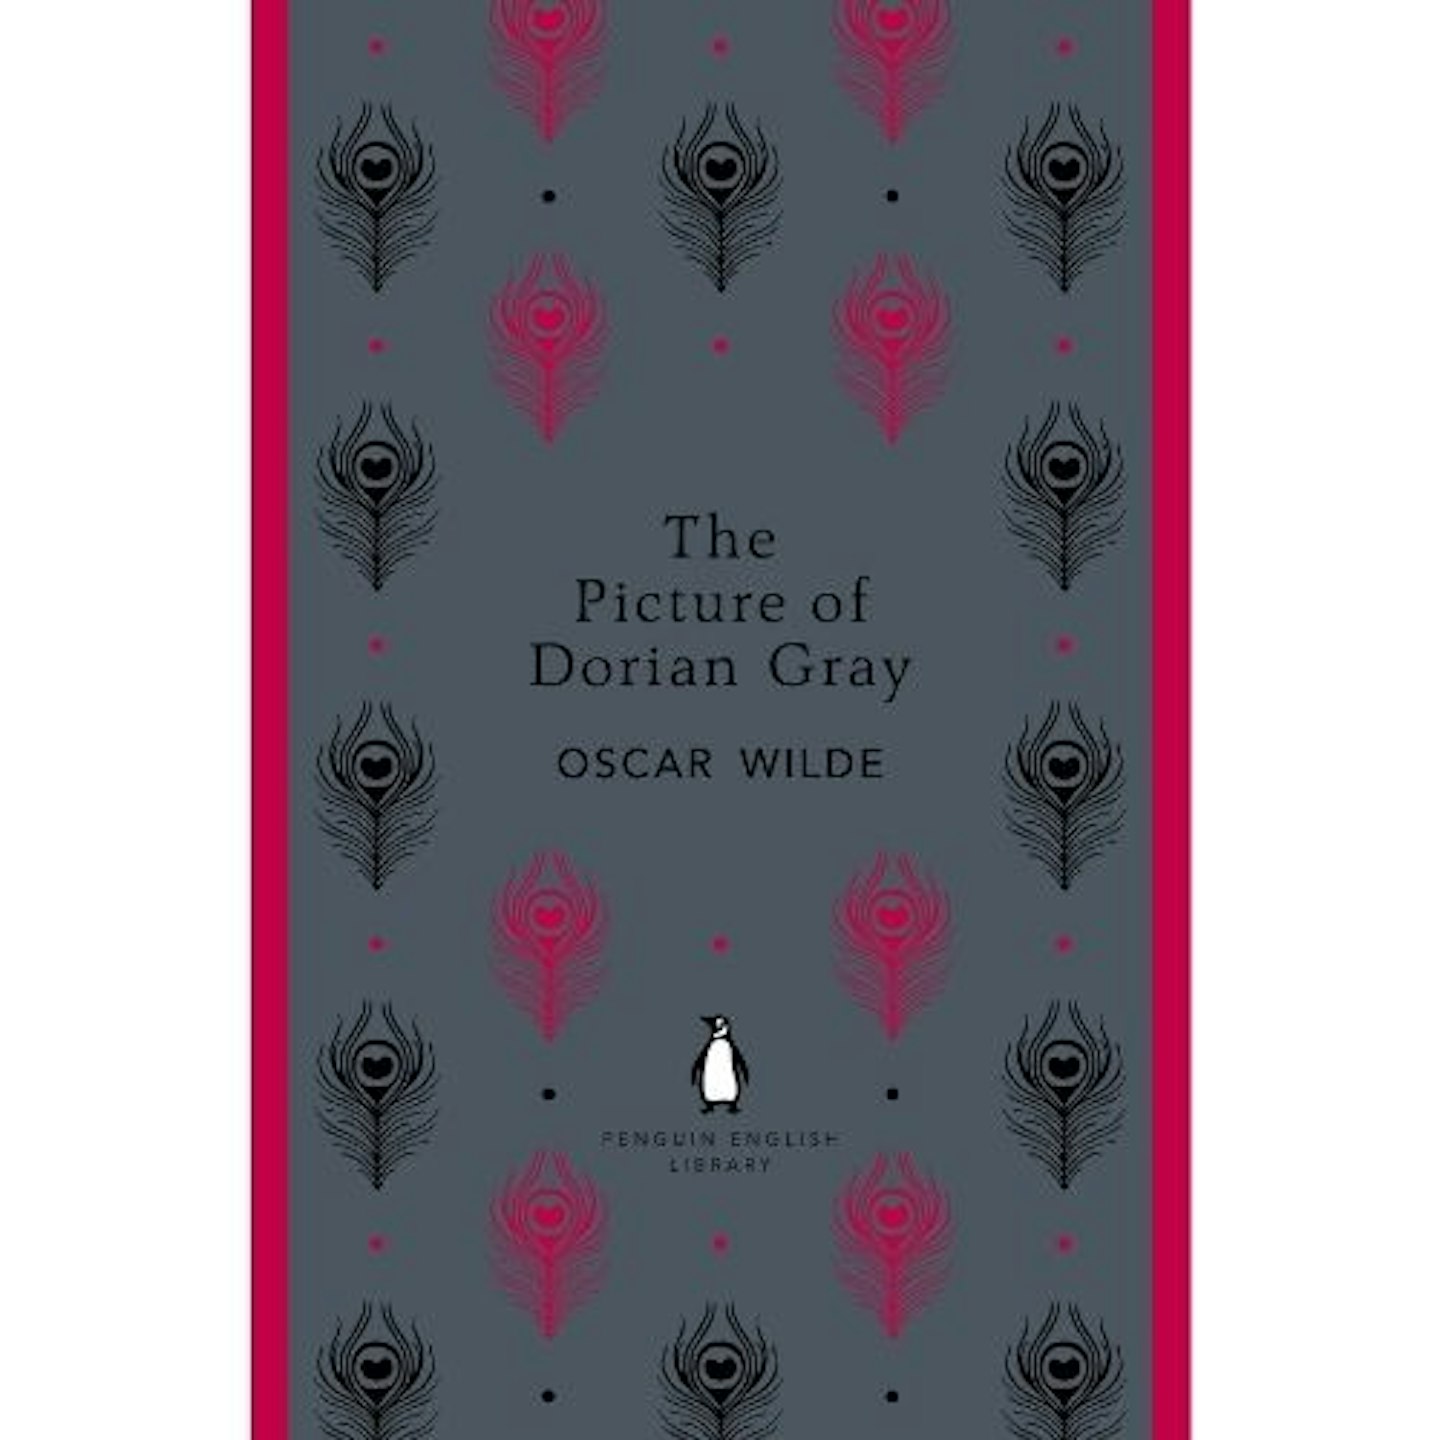 The Picture of Dorian Gray – Oscar Wilde